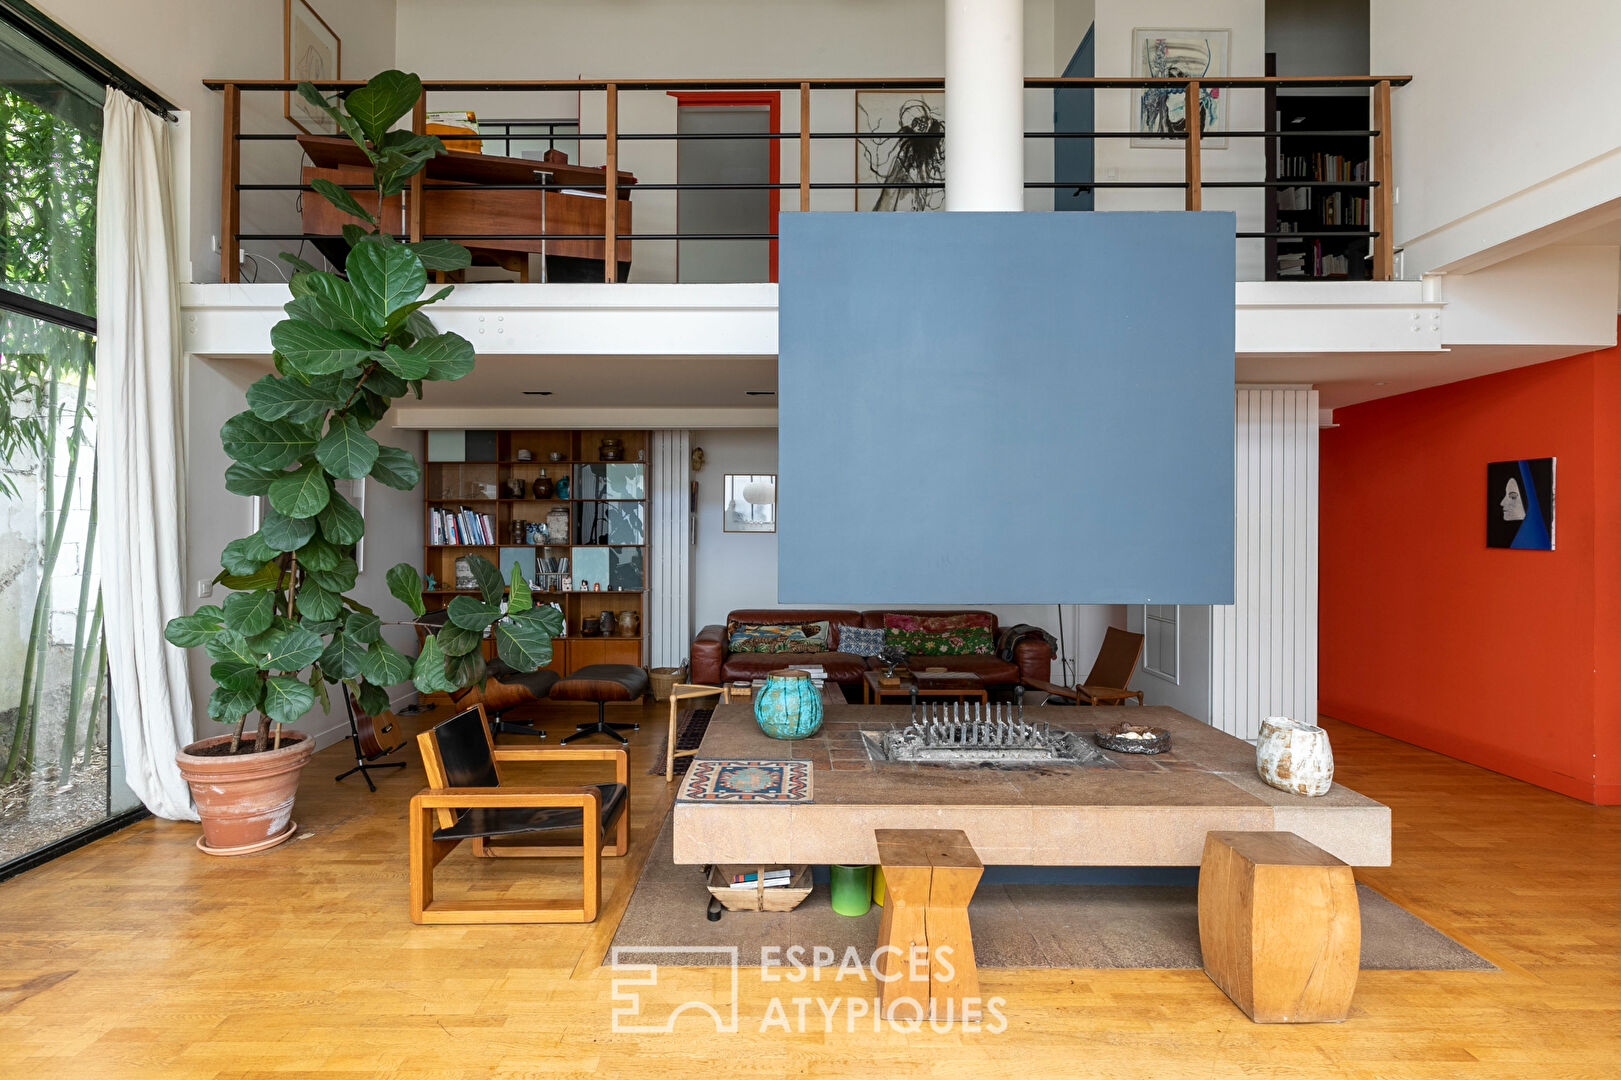 Architect’s loft in a former steel factory